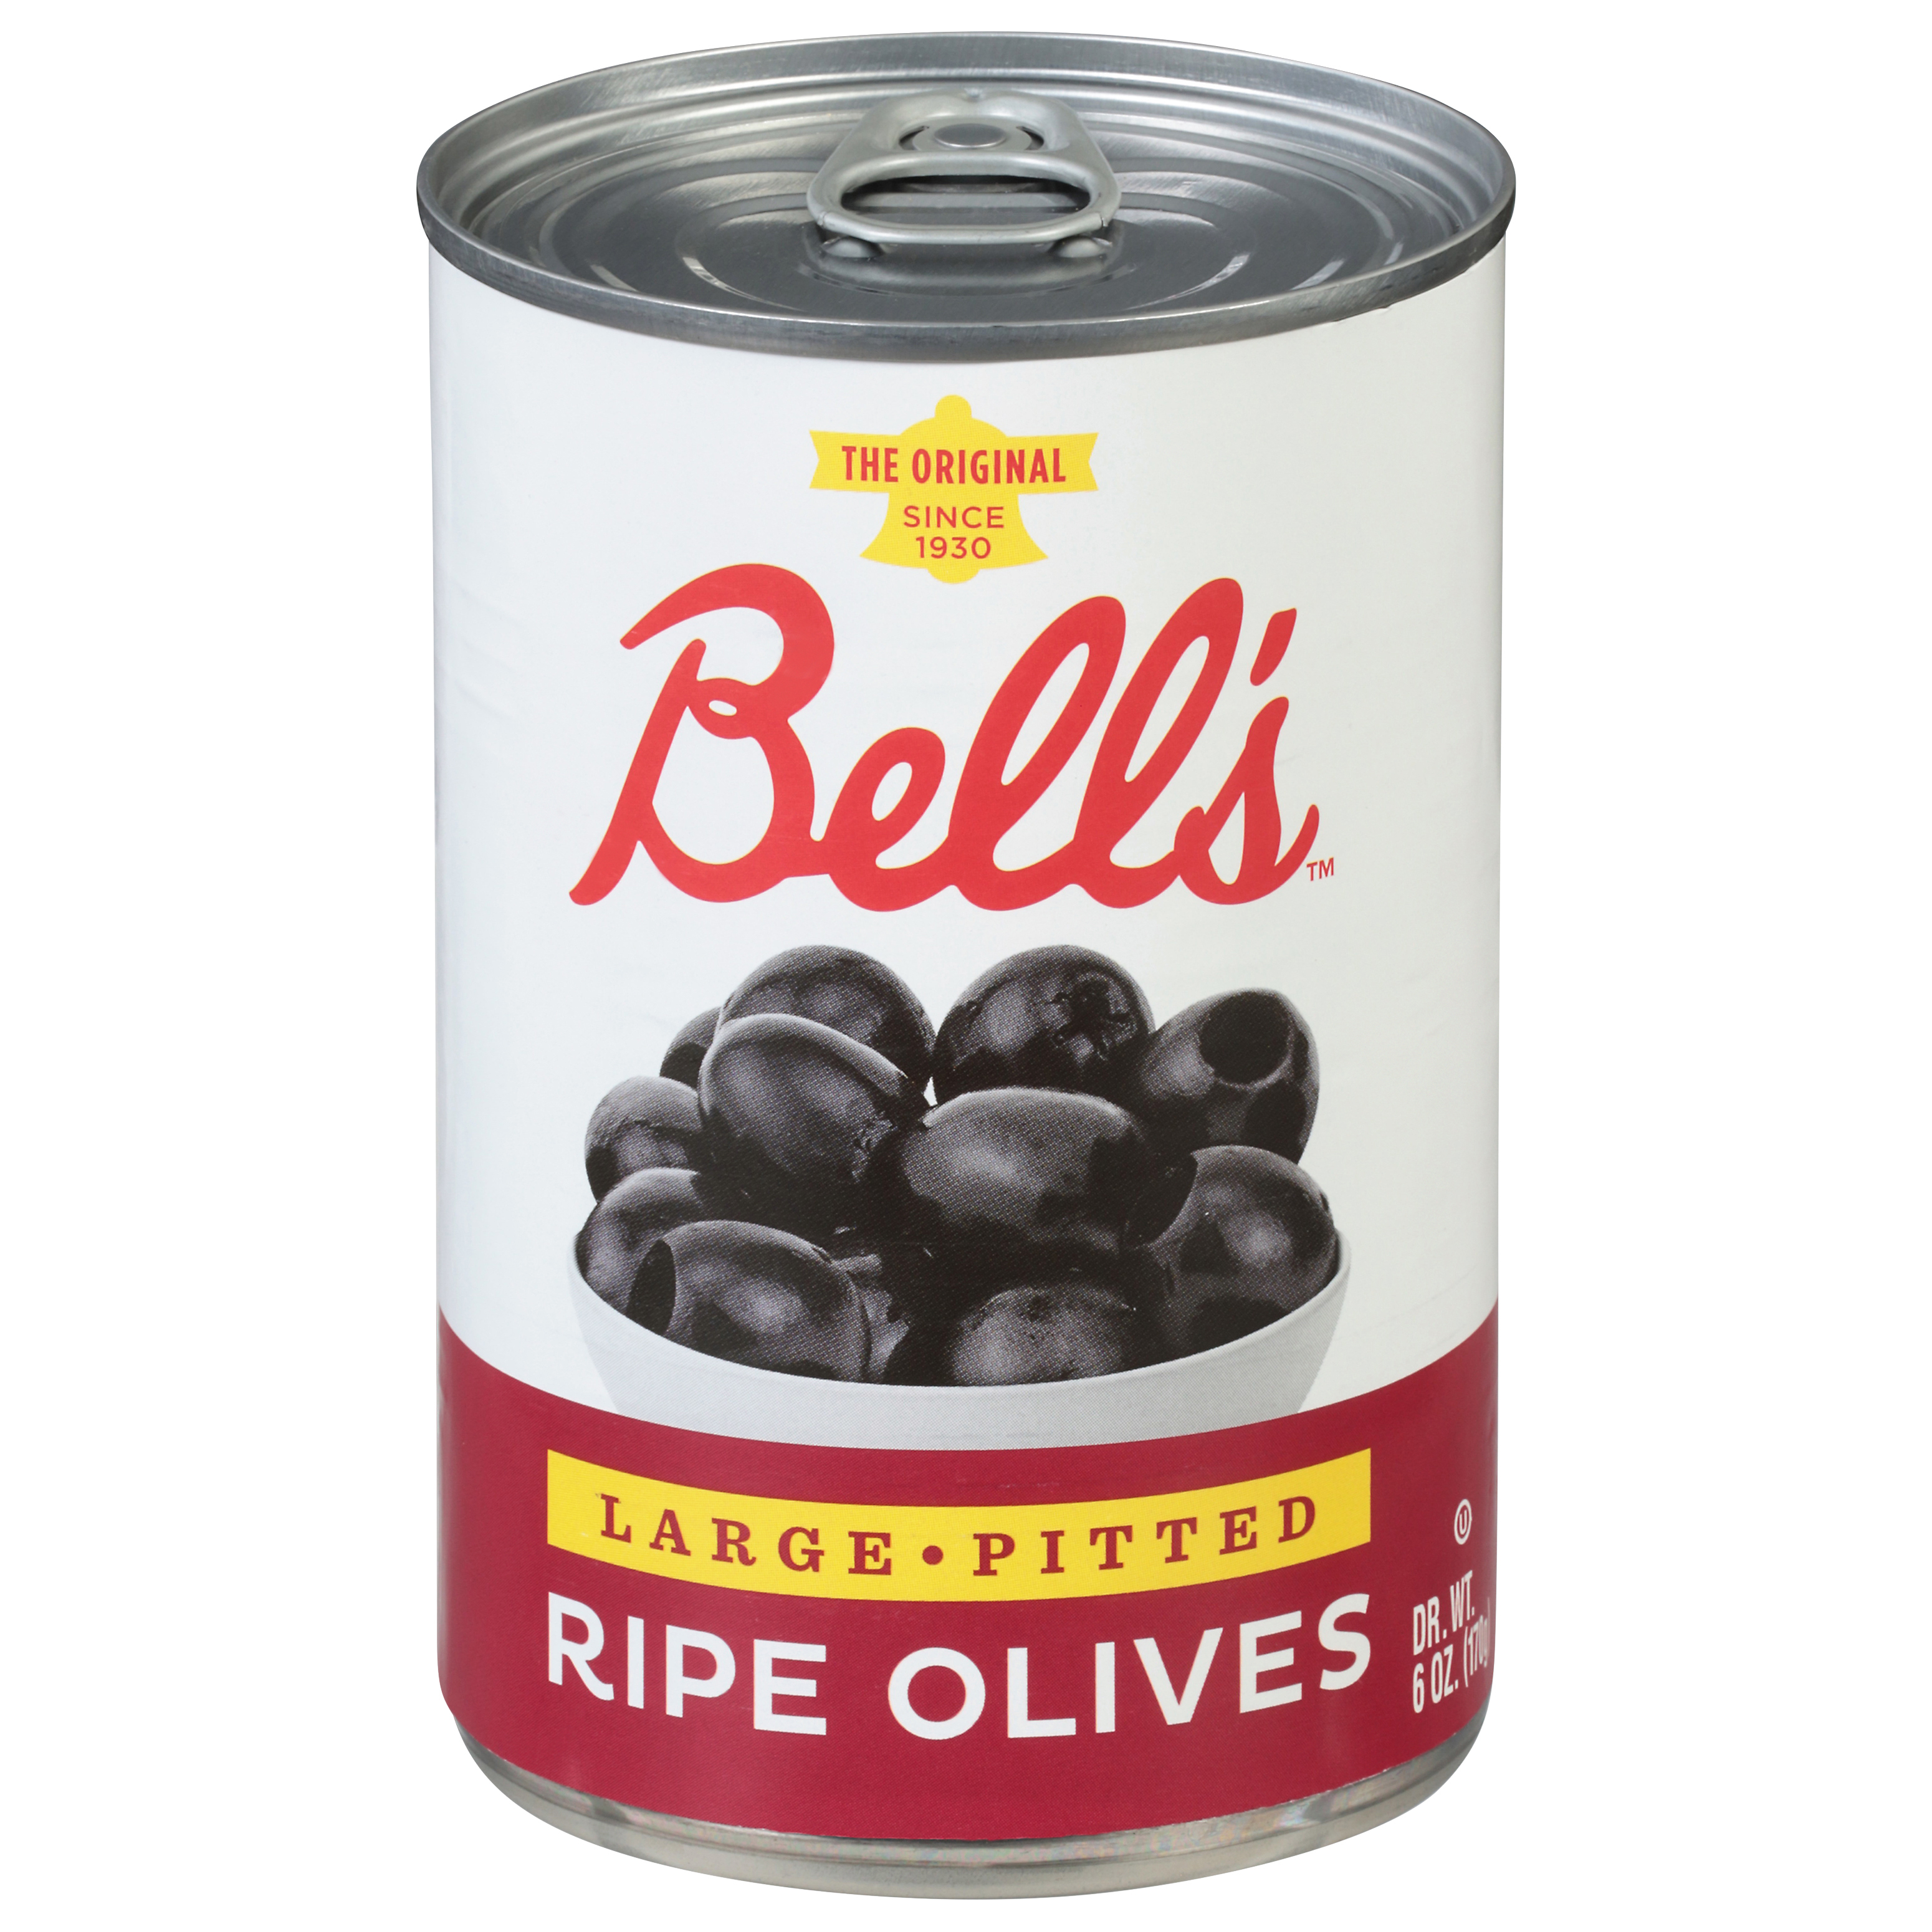 Bell's Pitted Ripe Olives Large 6 oz